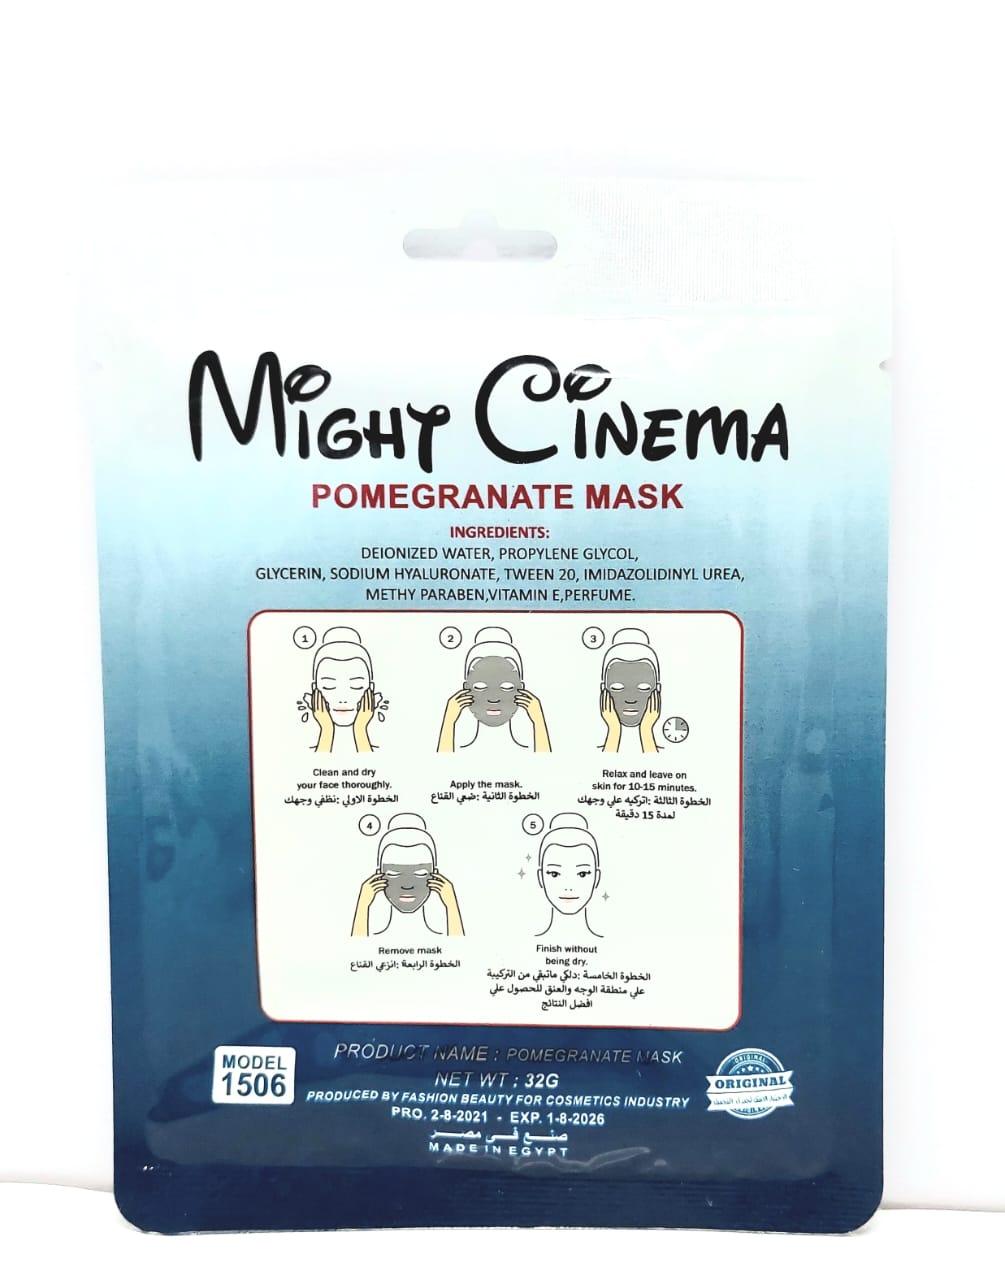 Pomegranate Extract Mask by Might Cinema .